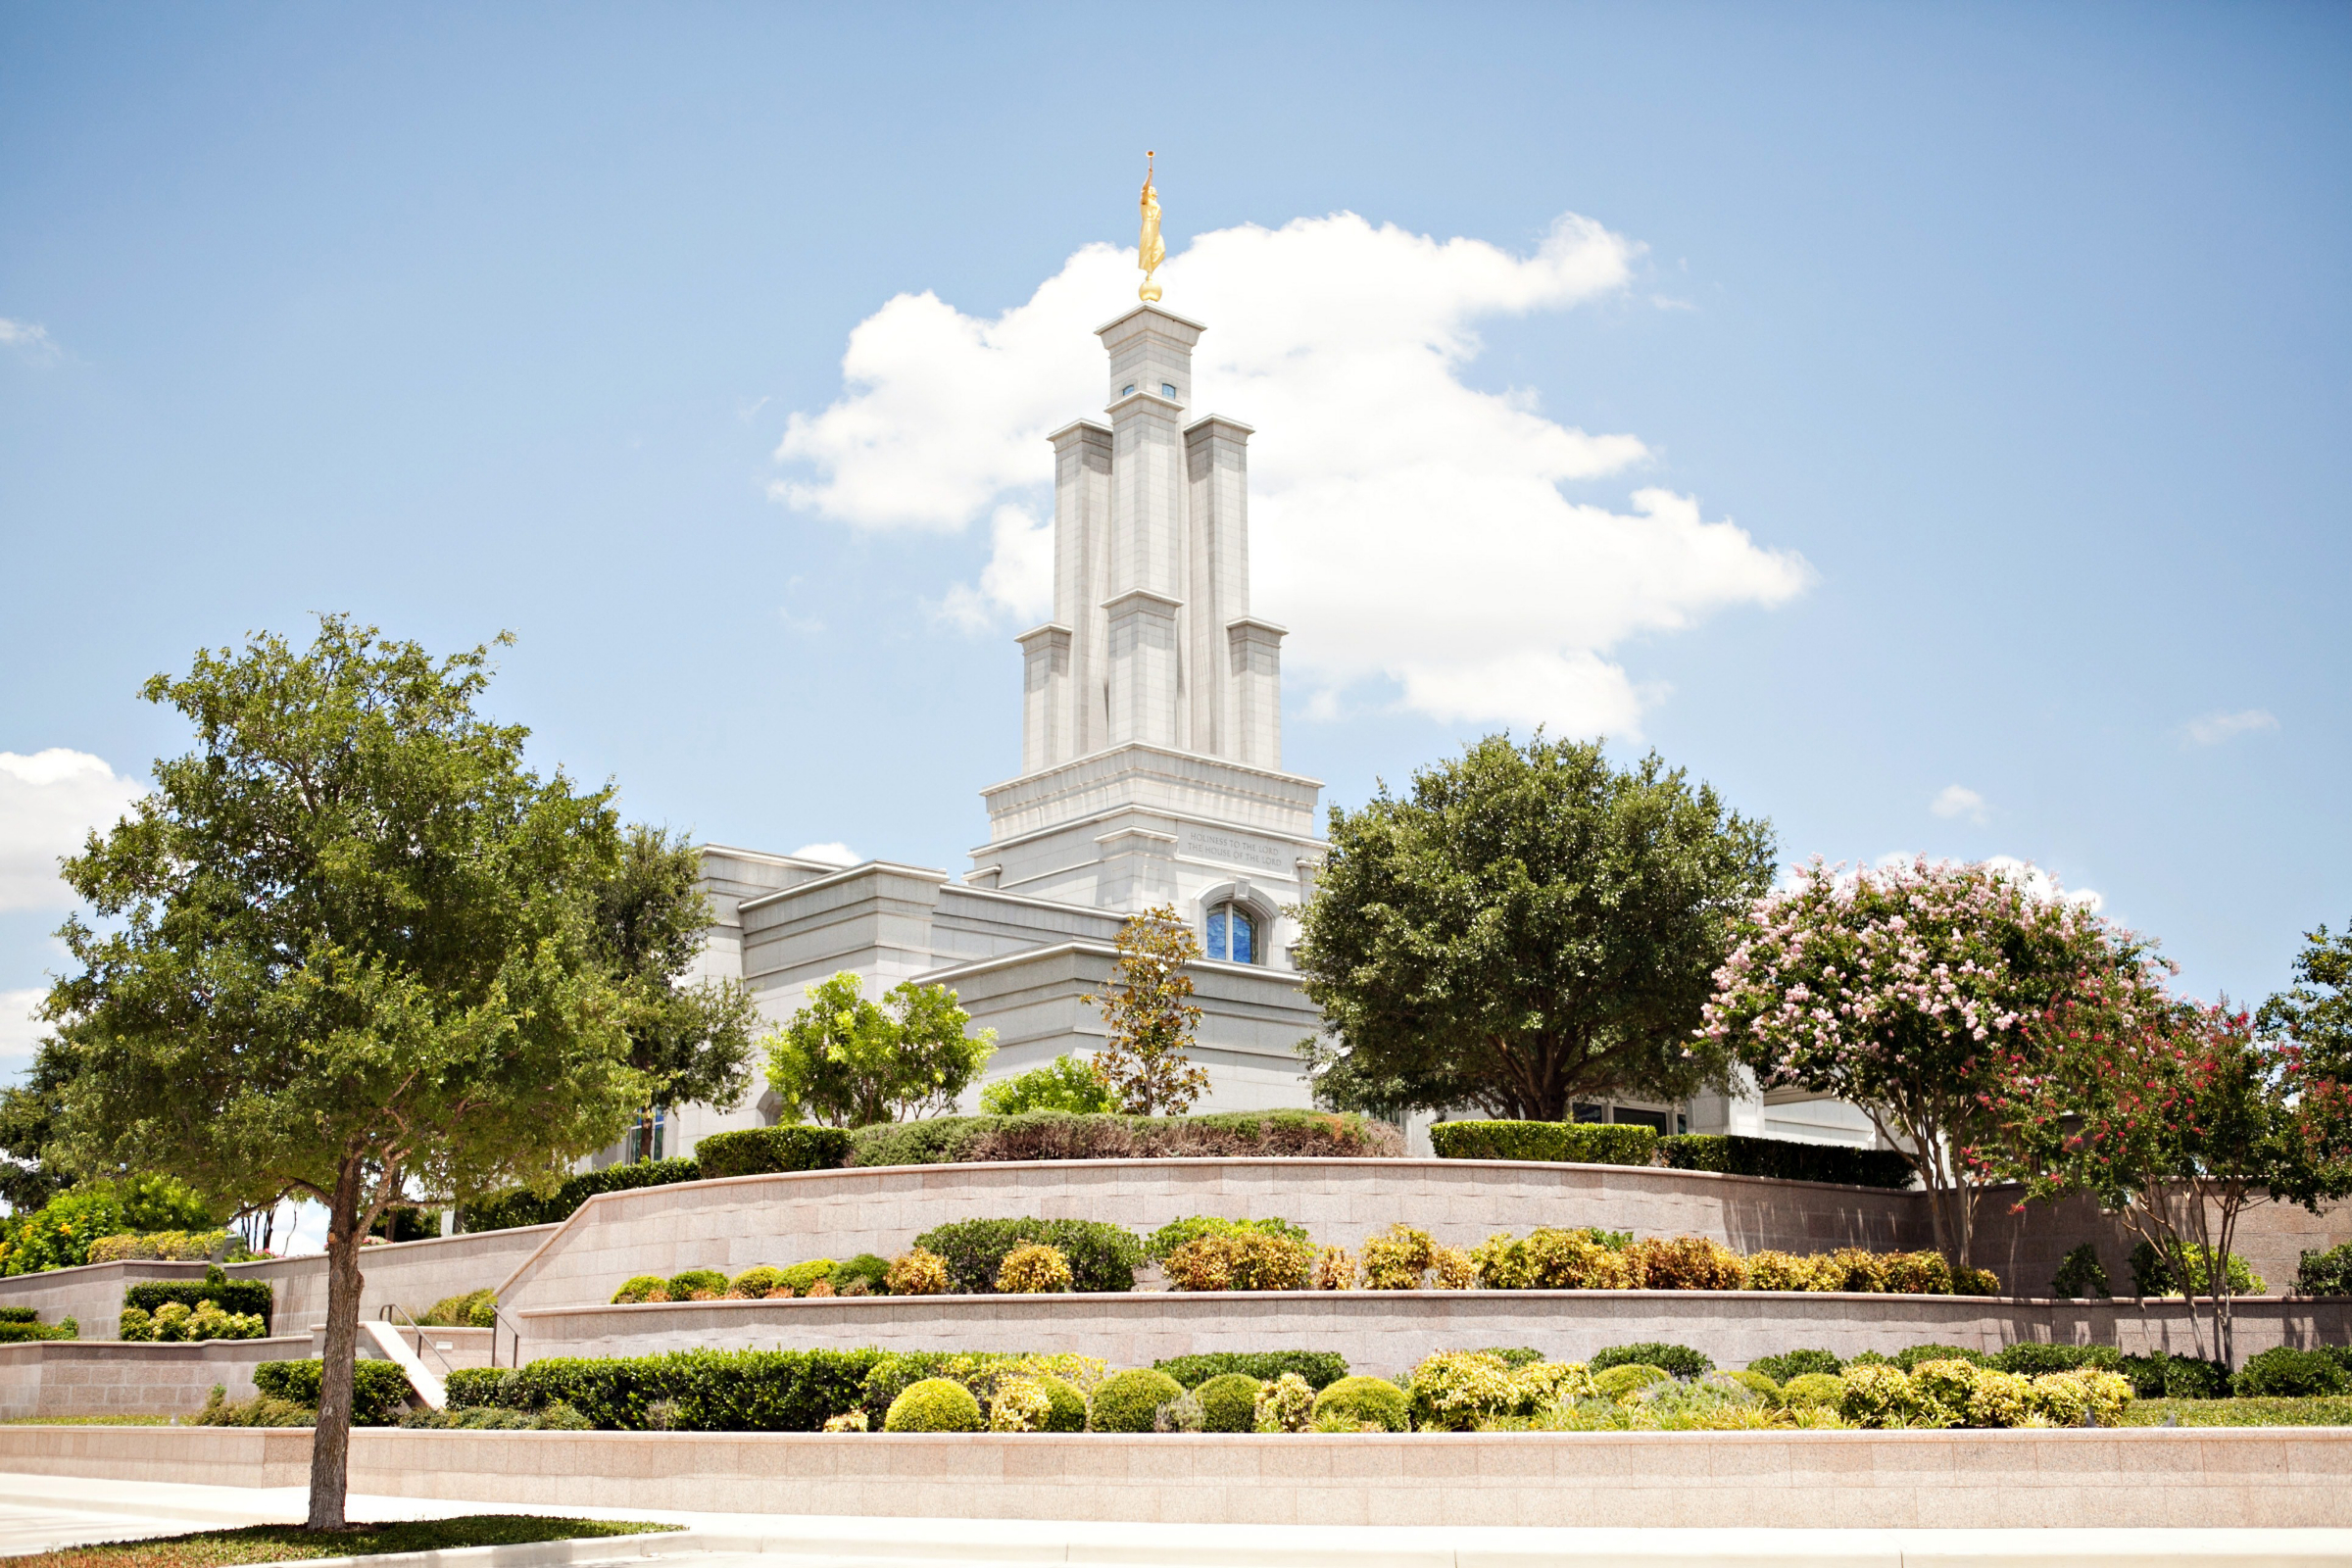 The Church of Jesus Christ of Latter-Day Saints | 1164 N Newcomb St, Porterville, CA, 93257 | +1 (559) 784-7643